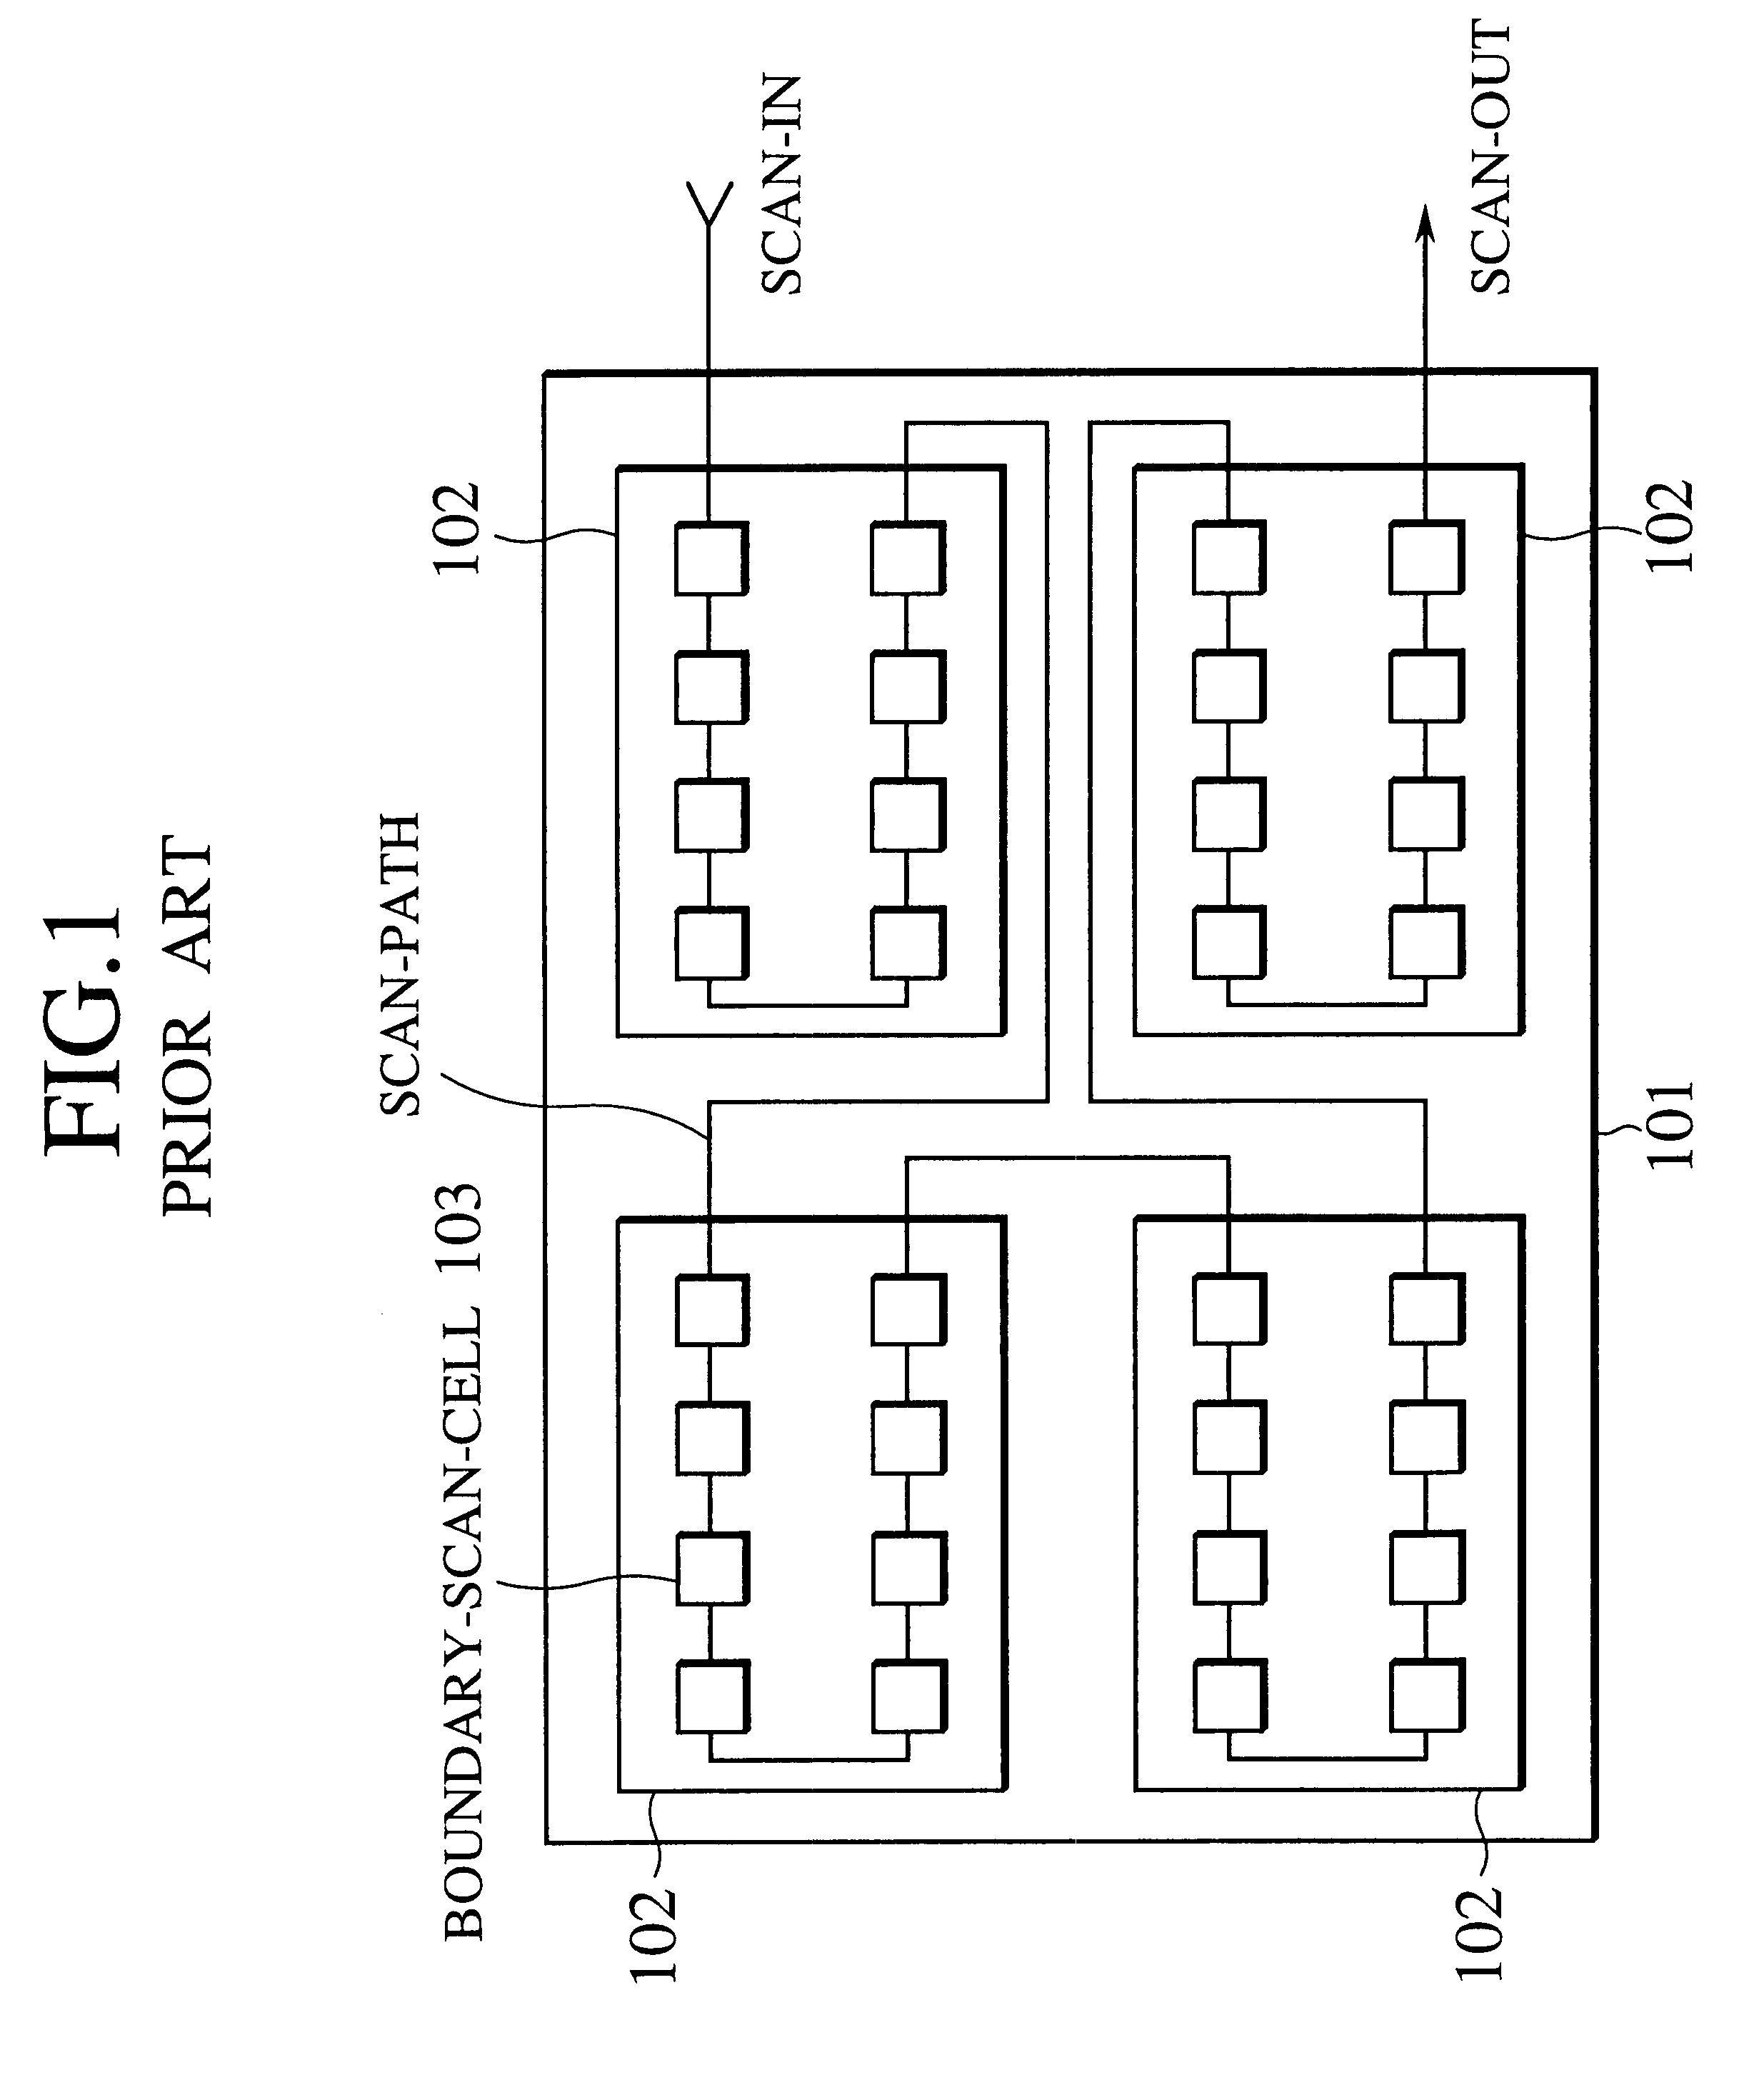 Semiconductor device provided with a boundary-scan test circuit